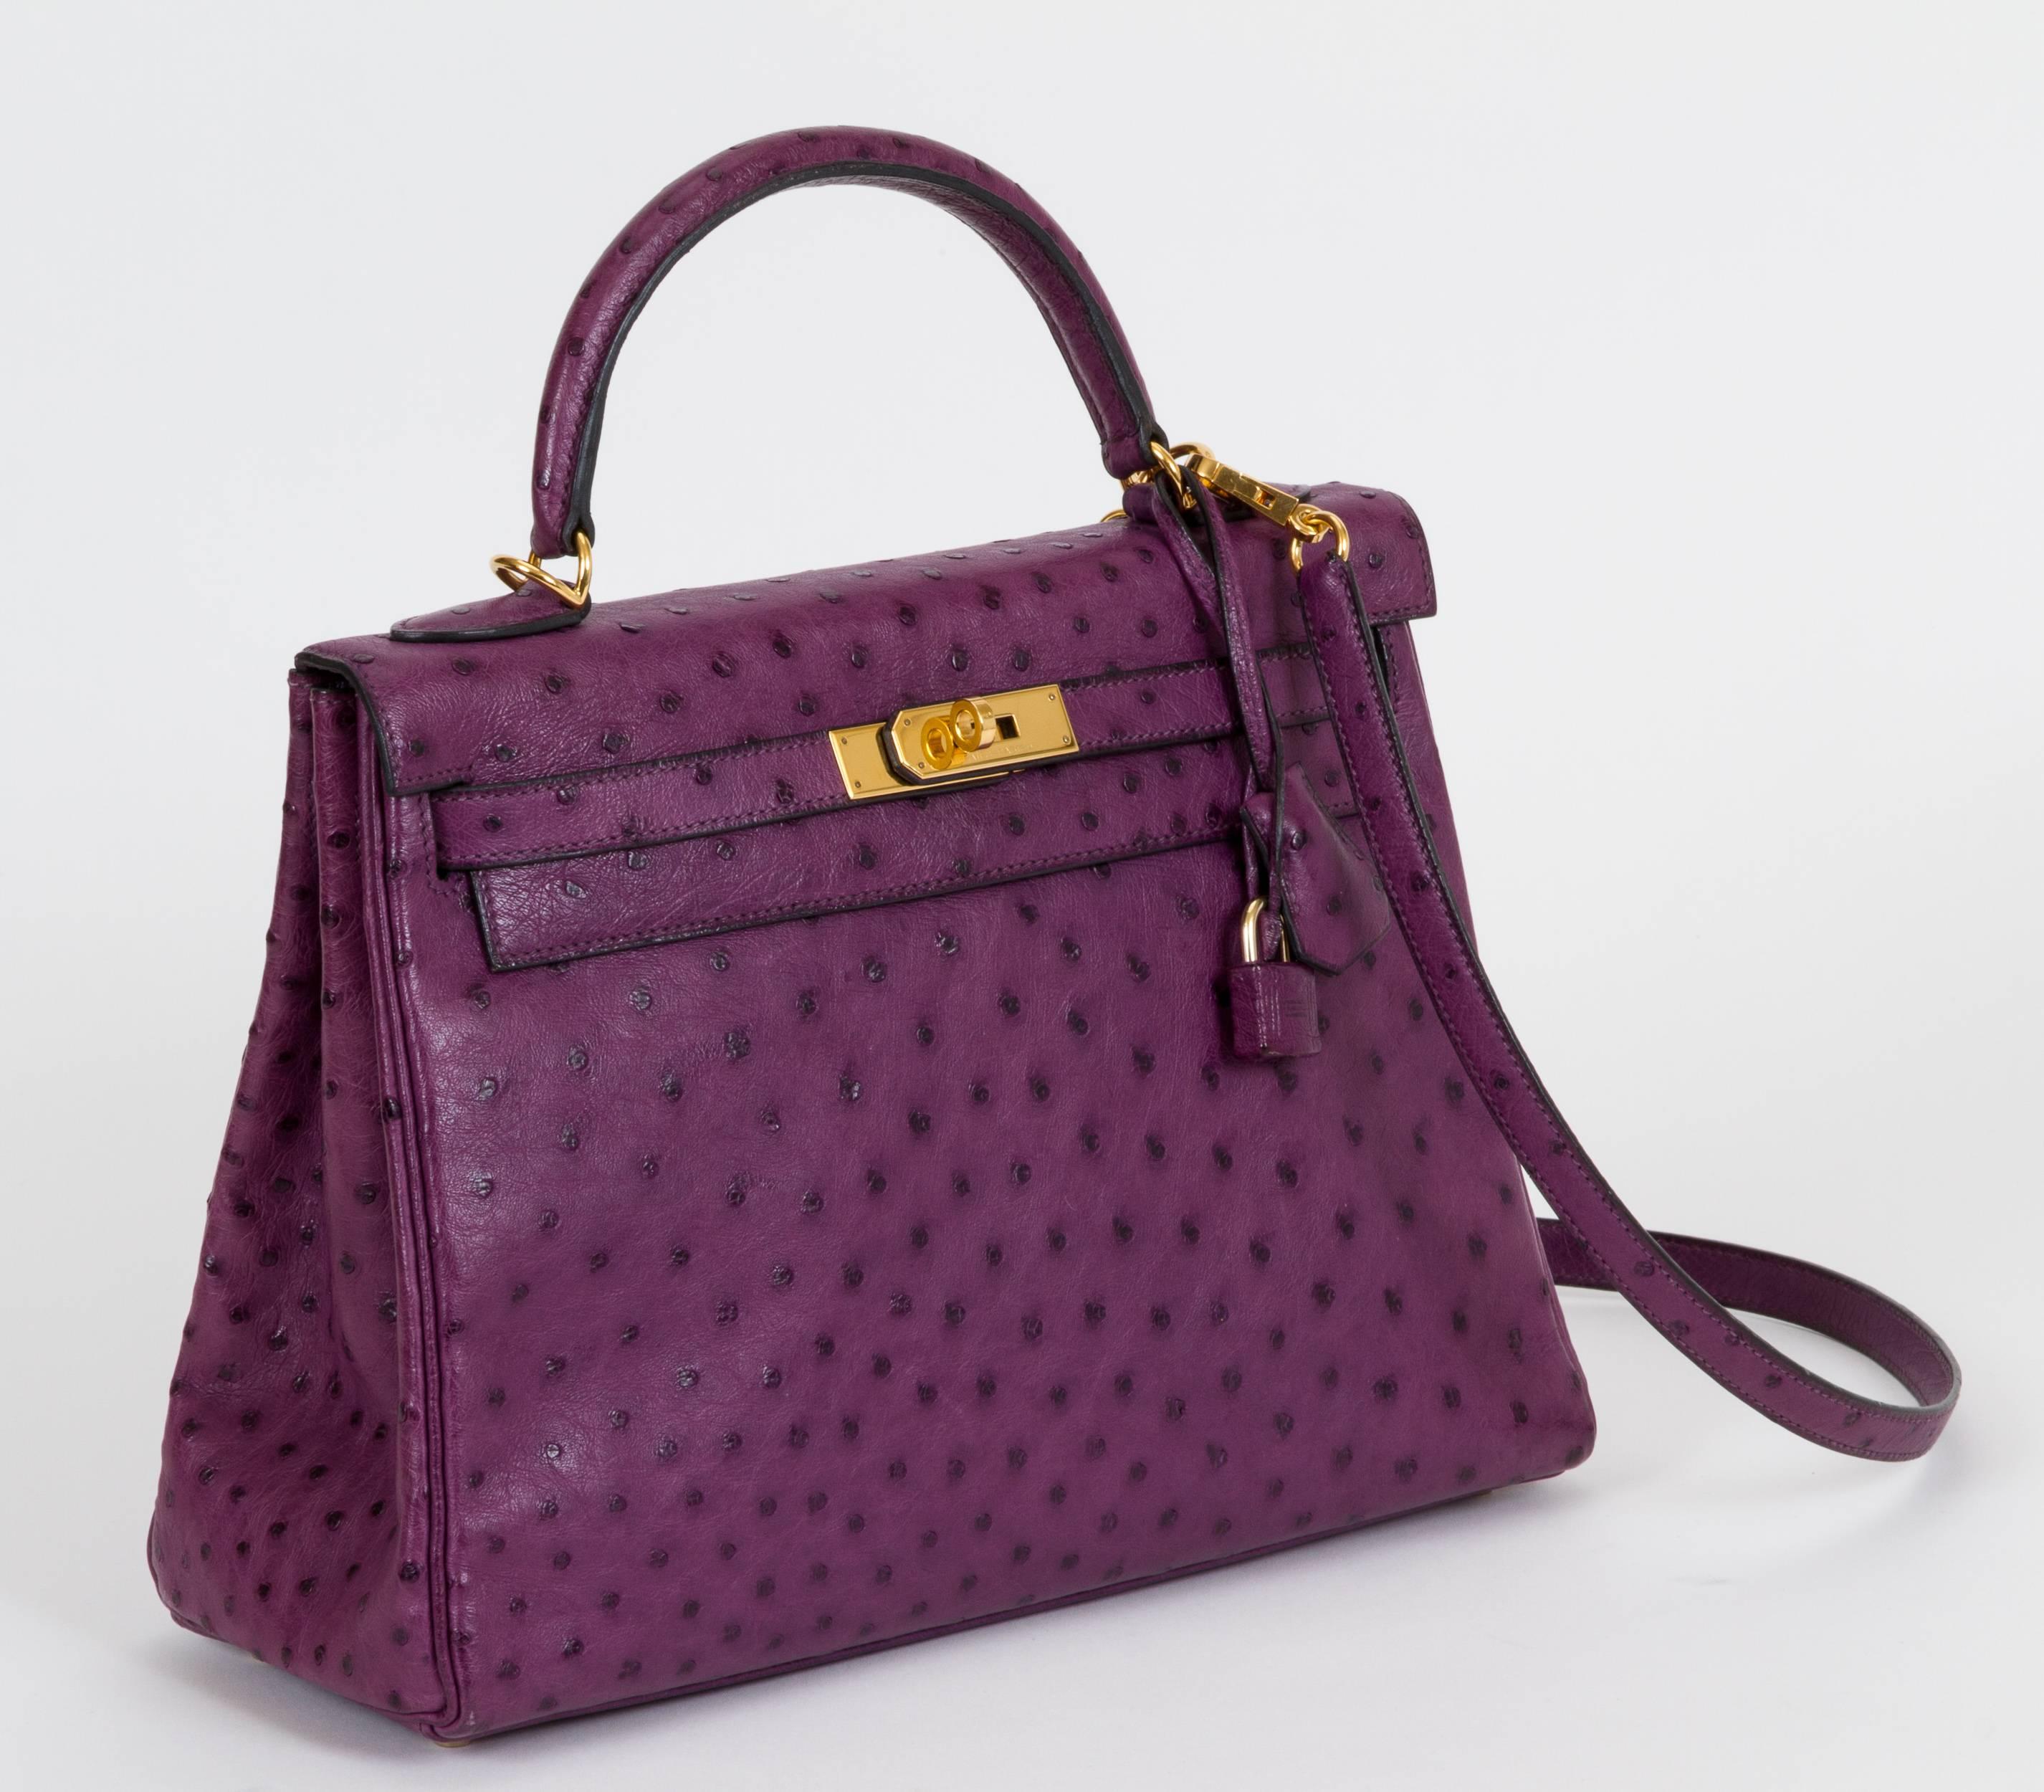 Hermès Kelly 32cm in ostrich leather. Iris purple color and goldtone hardware. Handle drop, 4"L. Date stamp J in a square, 2006. Comes with clochette, tirette, covered lock, keys, original dust bag and gift bag.
